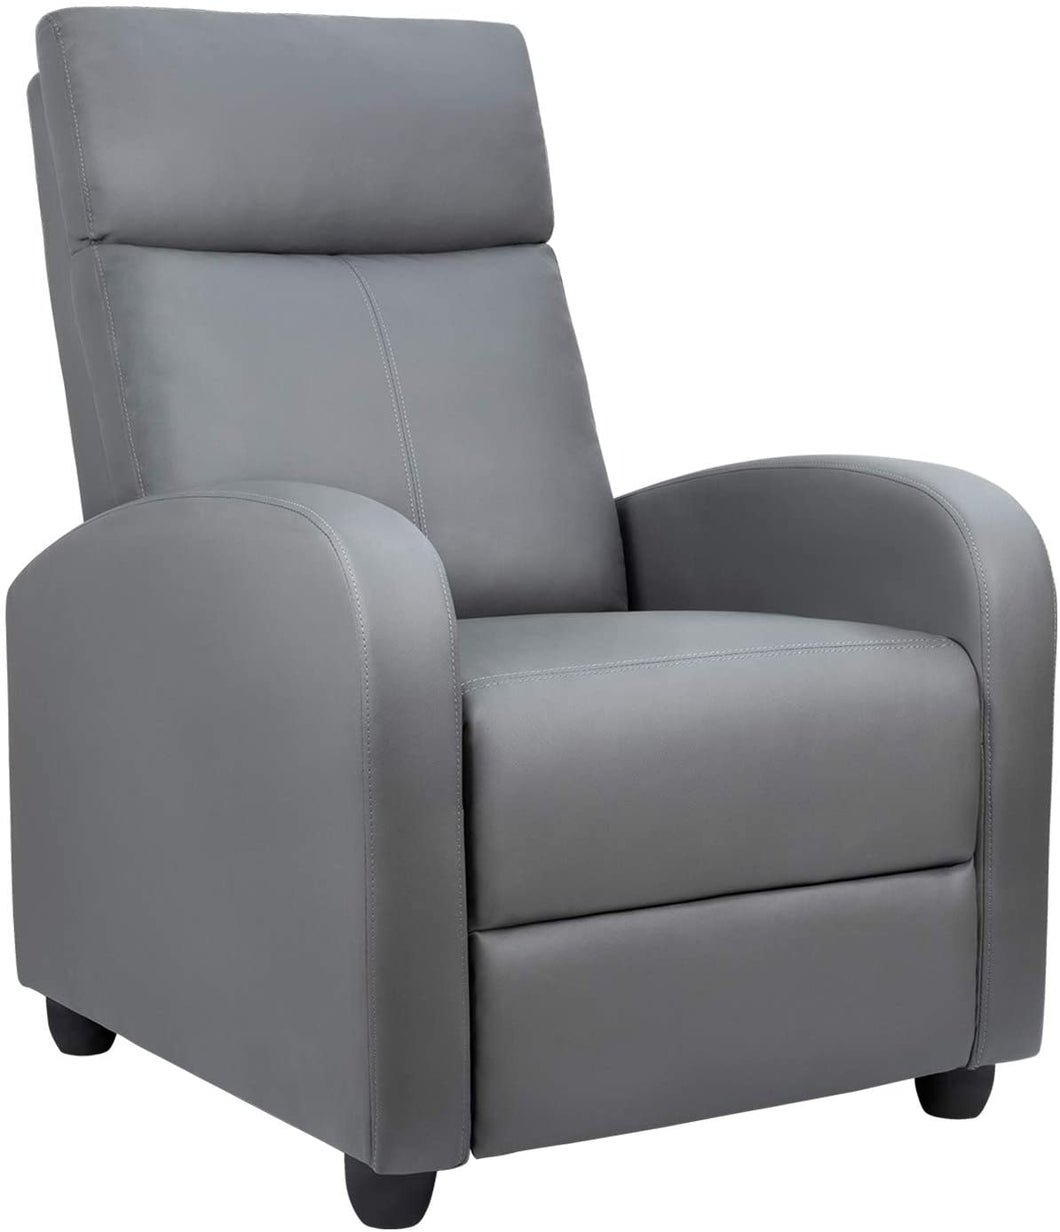 Single Recliner Chair Padded Seat PU Leather Living Room Sofa Recliner Modern Recliner Seat Club Chair Home Theater Seating (Gray)